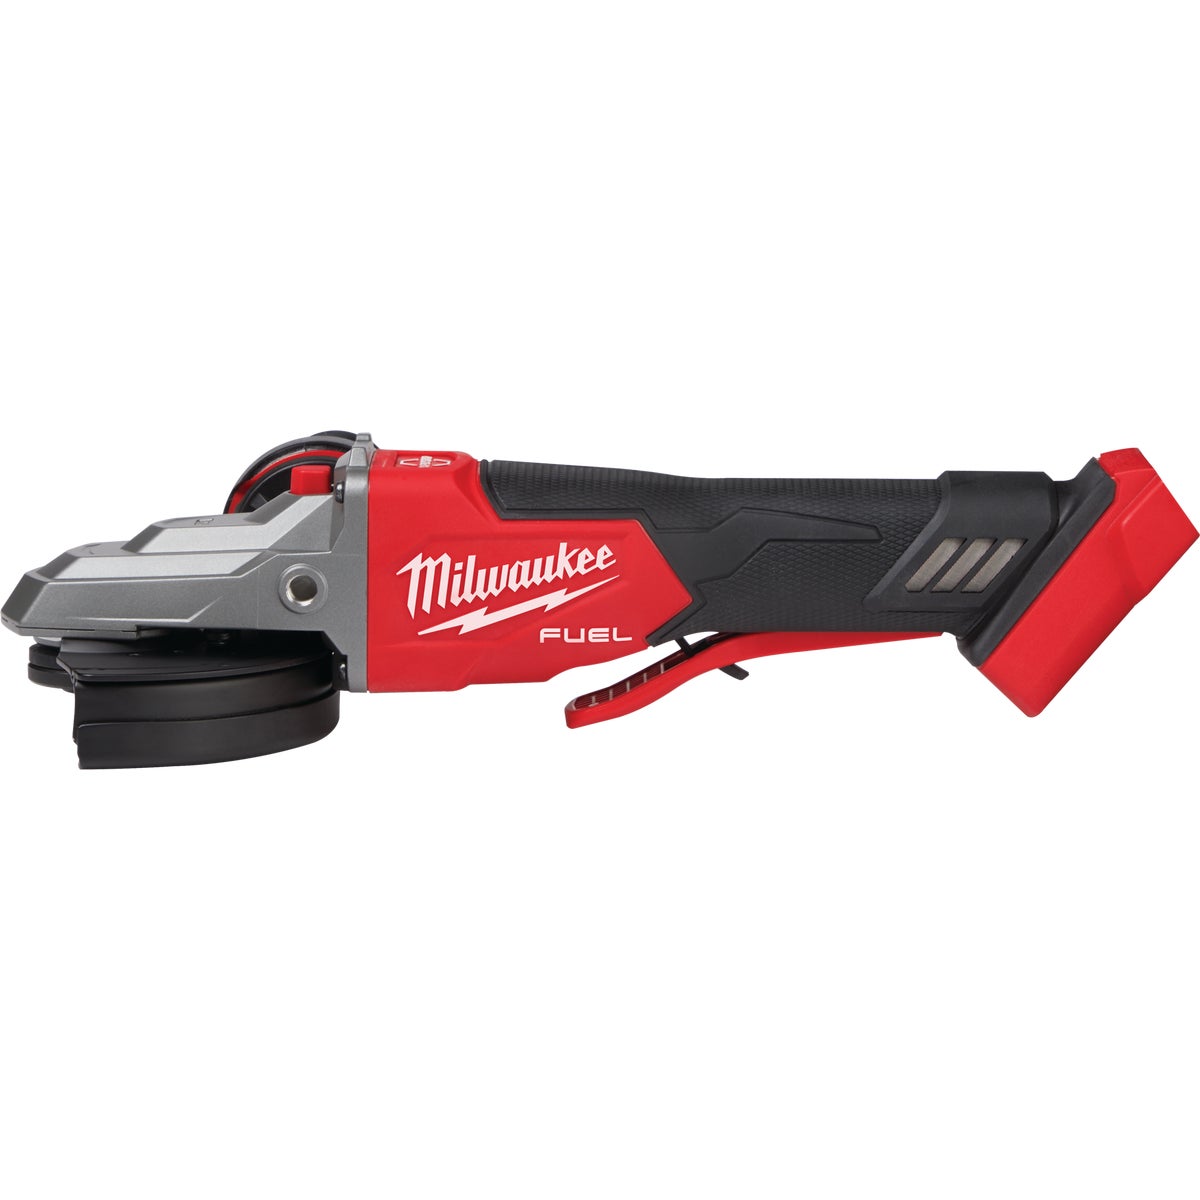 Milwaukee M18 FUEL Lithium-Ion 5 In. Brushless Flathead Braking Cordless Angle Grinder with Paddle Switch, No-Lock (Tool Only)